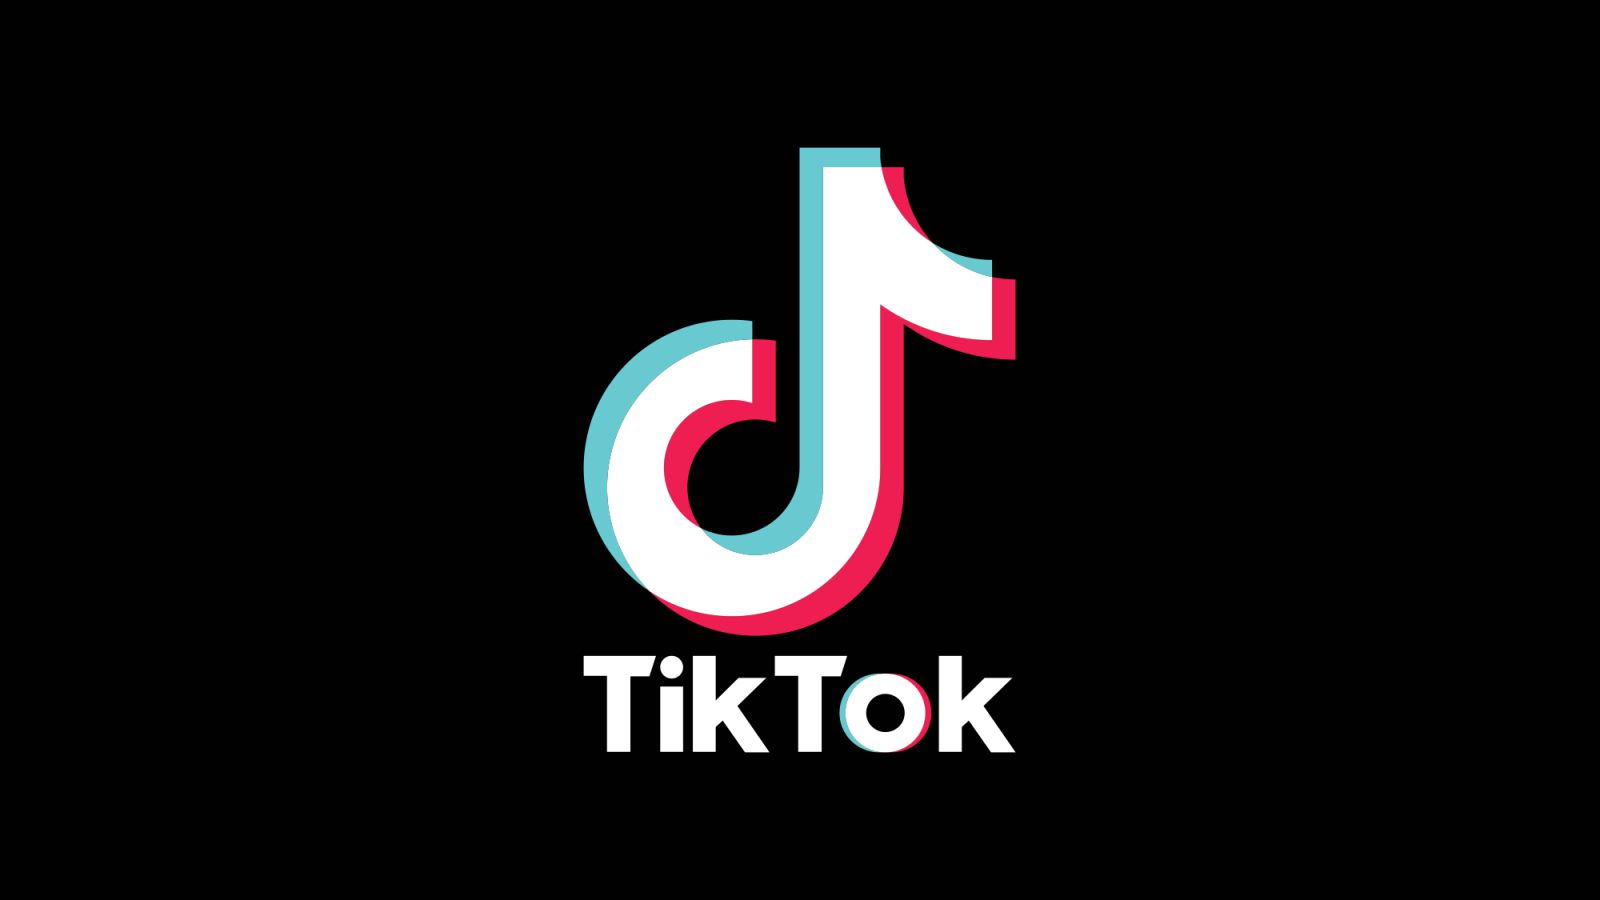 TikTok’s In-App Browser Reportedly Capable of Monitoring Anything You Type